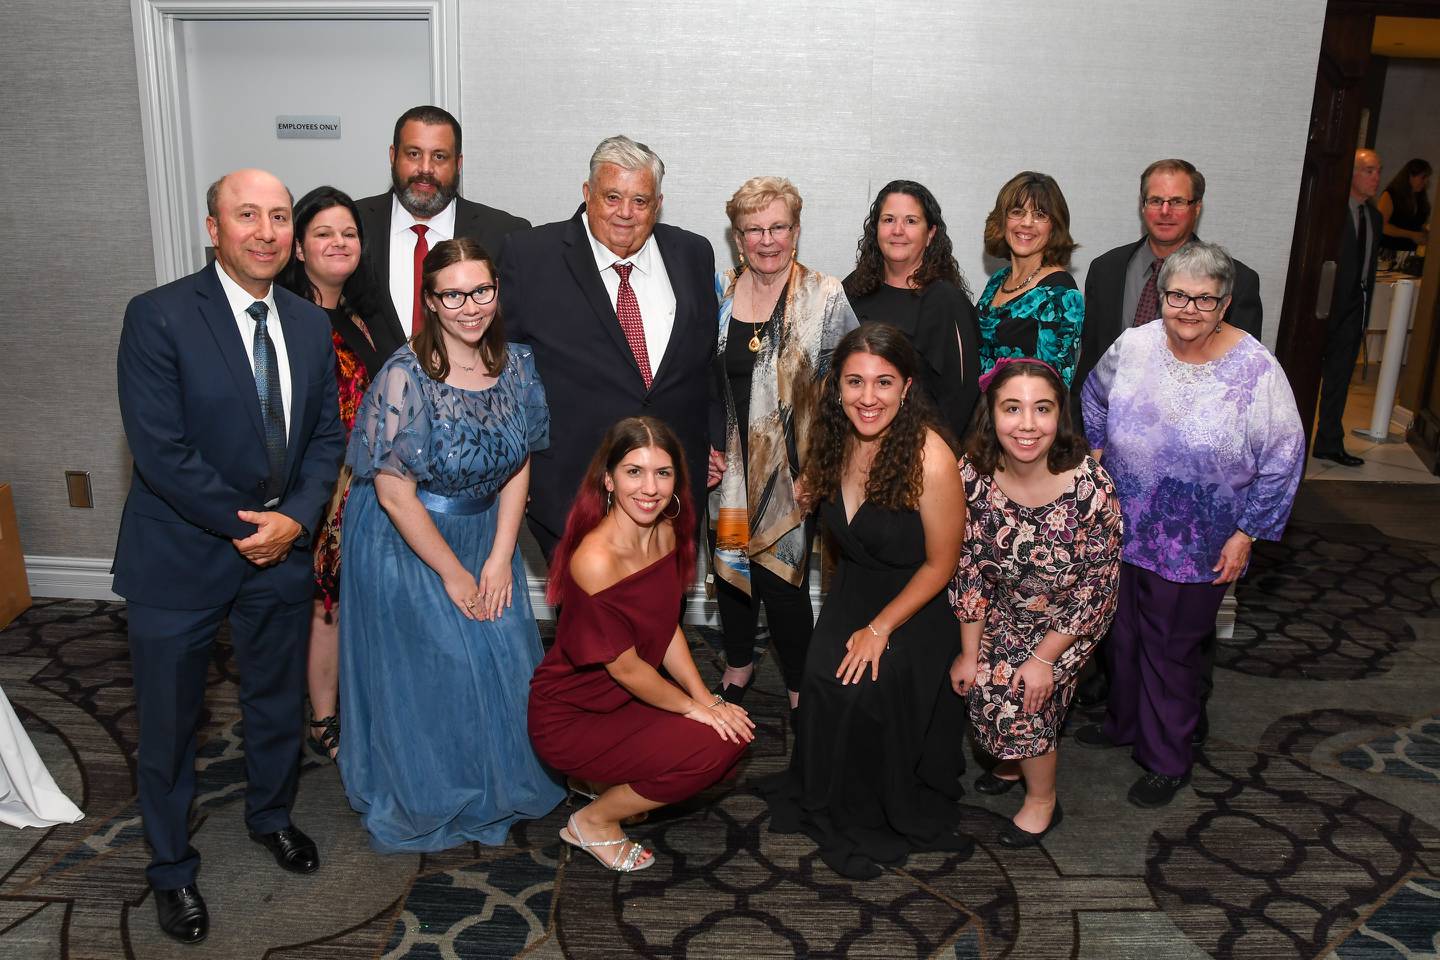 Trinity Services in New Lenox honored current board chairman Raymond D. McShane for 50 years of service at its 33rd annual “Better Together” dinner dance on Saturday, Sept. 24, 2022, at The Odyssey in Tinley Park. Pictured are members of McShane's family. They are (from left, standing): Tony Vari, Kadie McShane, Ray McShane, Jr., Raymond D. McShane, Lynda McShane, Cathey Koerner, Sue Vari and Craig Koerner, and (from left, crouching): : Emily Mepham, Lauren Vari, Sarah Vari, Christin Vari and Irene Huffman.